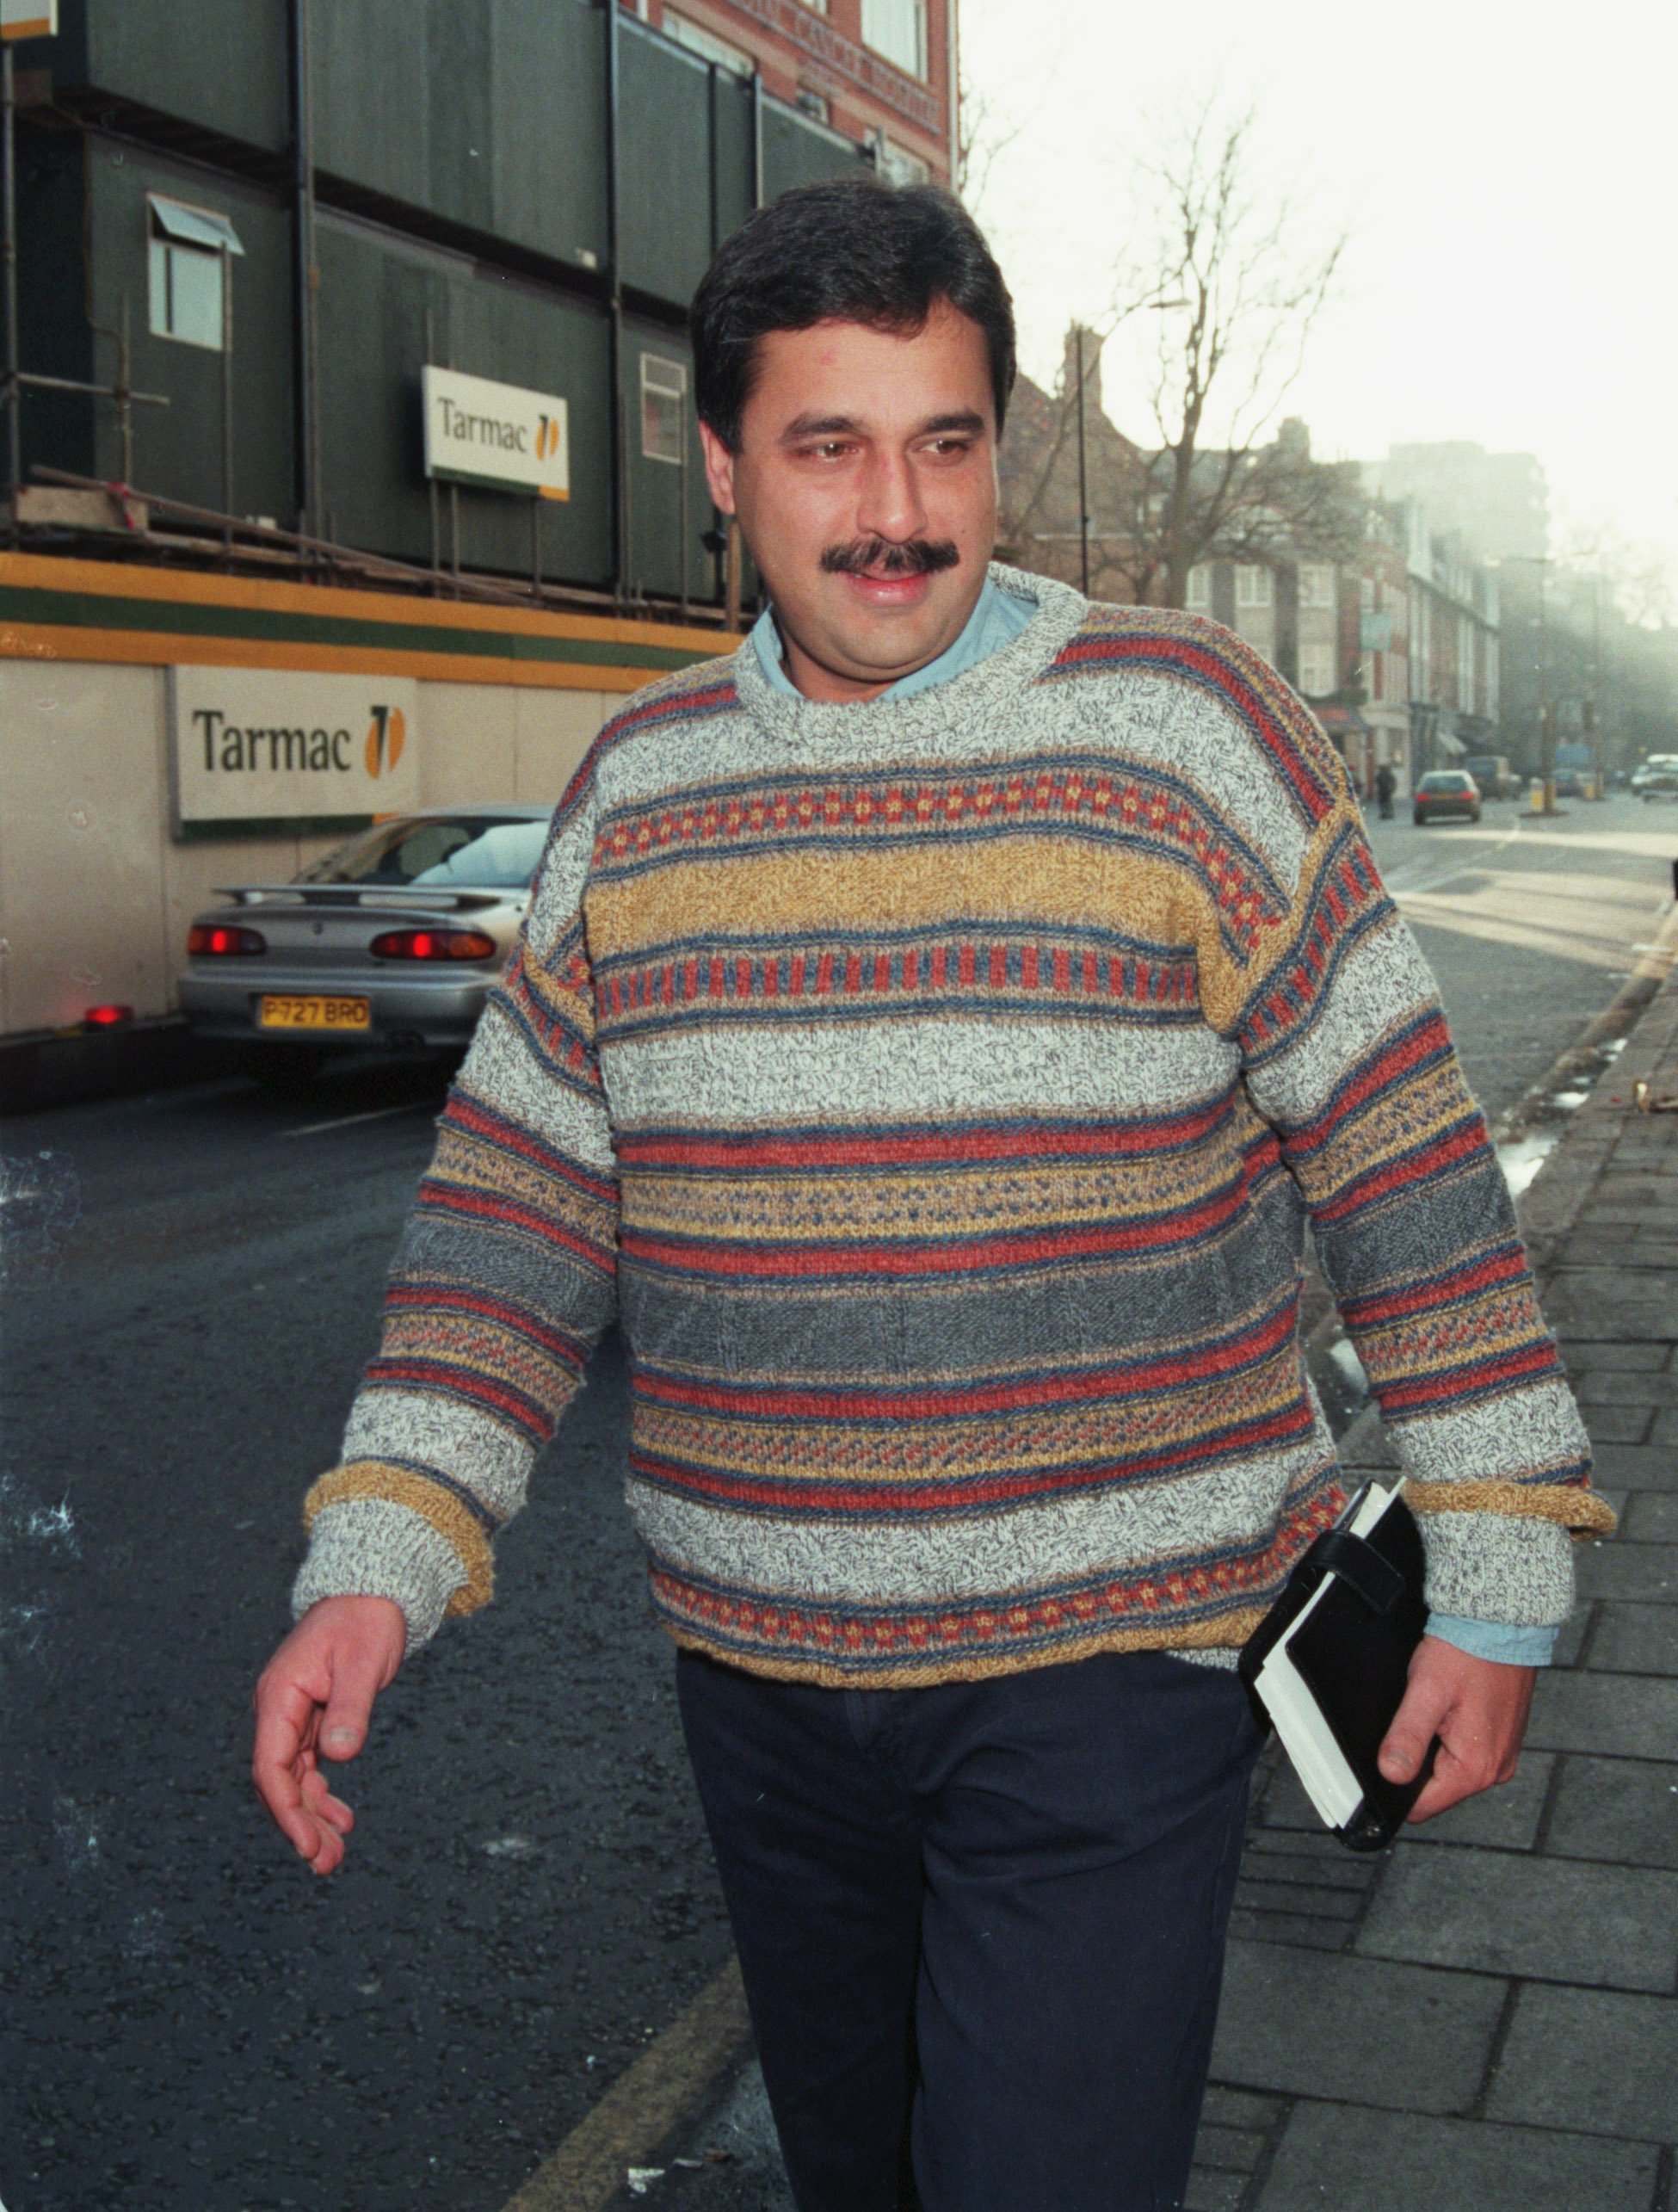 Pakistani surgeon Hasnat Khan, identified as an "ex-lover" of Lady Diana, Princess of Wales, 1997 | Photo: GettyImages